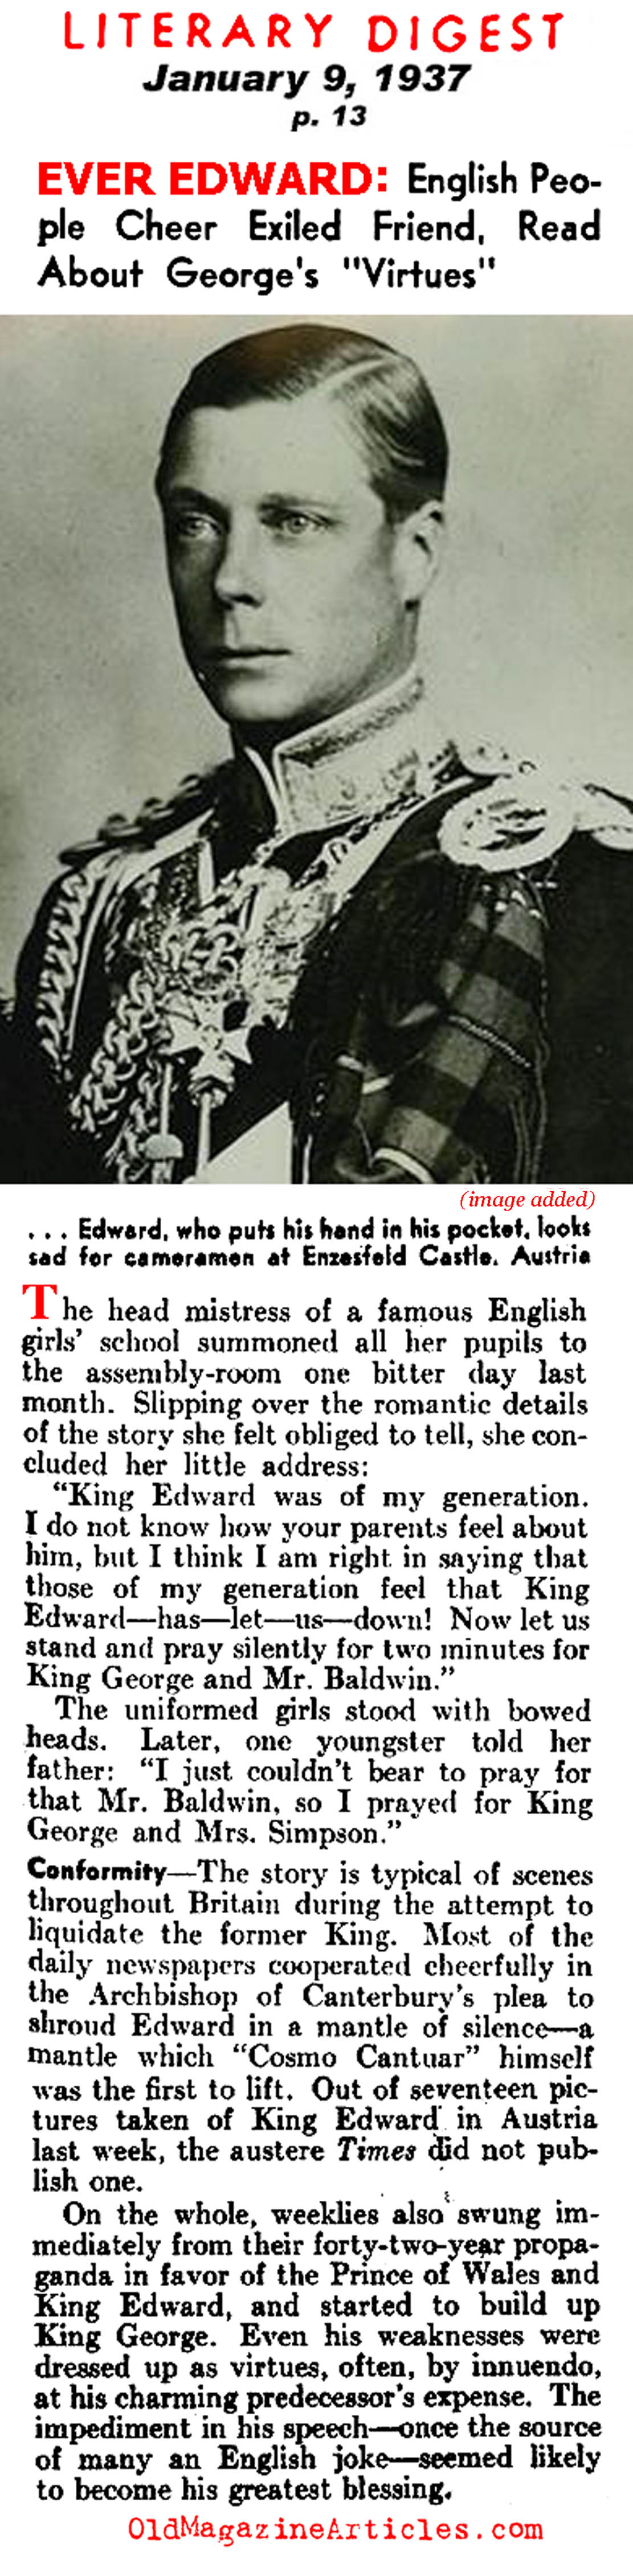 ''He Let Us Down...'' (Literary Digest, 1937)